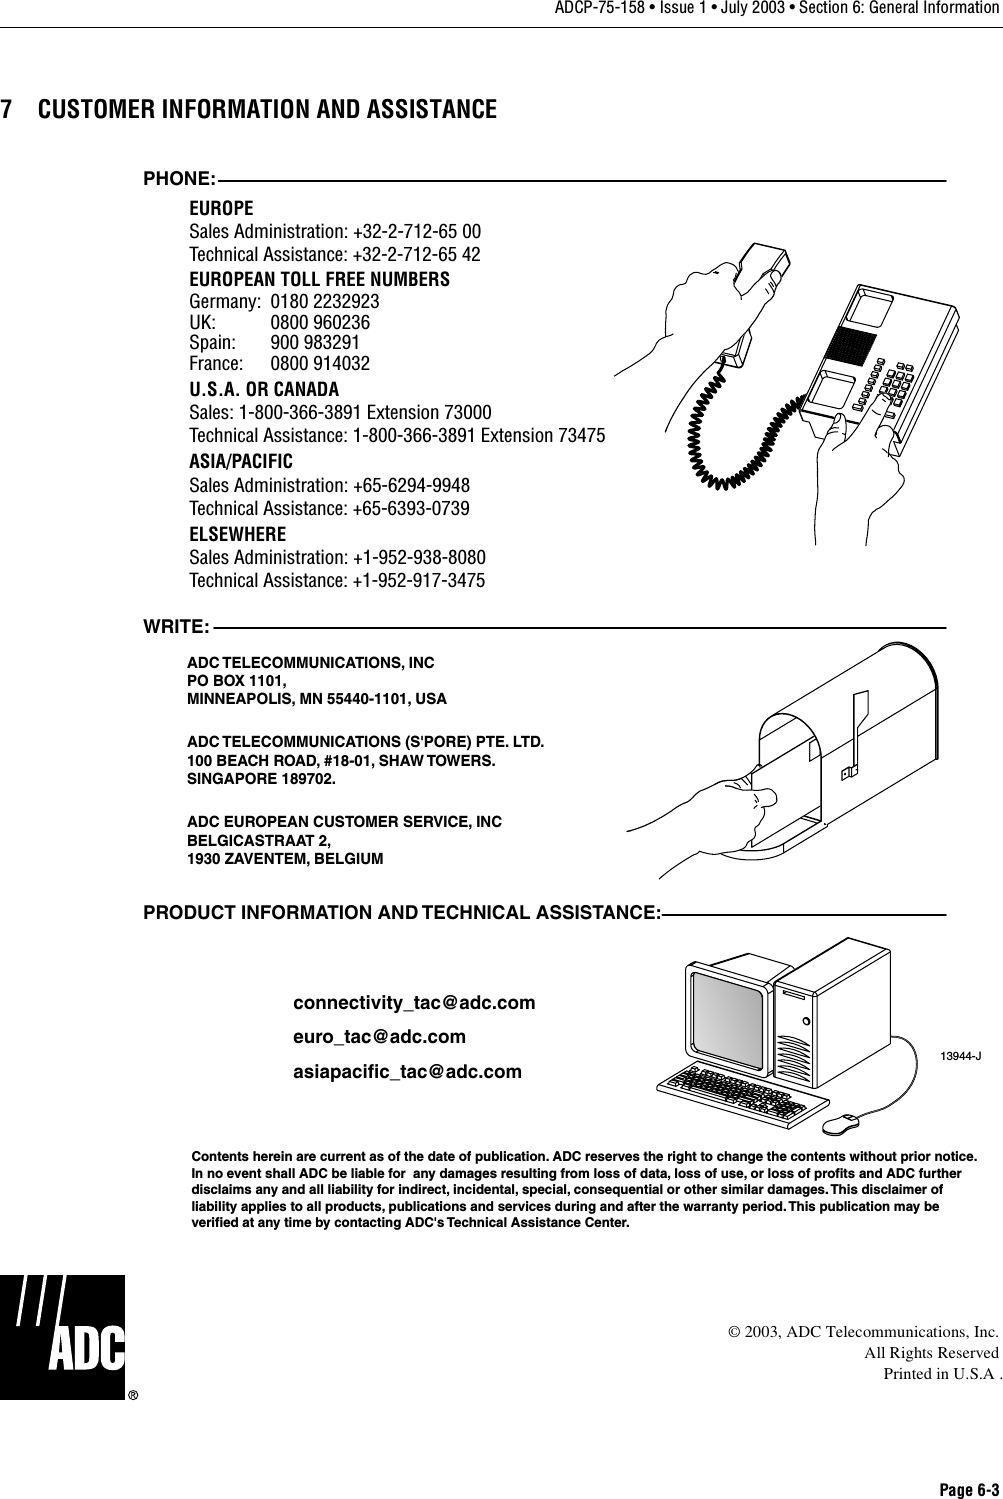 Page 6-3ADCP-75-158 • Issue 1 • July 2003 • Section 6: General Information7 CUSTOMER INFORMATION AND ASSISTANCE© 2003, ADC Telecommunications, Inc.All Rights ReservedPrinted in U.S.A .13944-JWRITE:ADC TELECOMMUNICATIONS, INCPO BOX 1101,MINNEAPOLIS, MN 55440-1101, USAADC TELECOMMUNICATIONS (S&apos;PORE) PTE. LTD.100 BEACH ROAD, #18-01, SHAW TOWERS.SINGAPORE 189702.ADC EUROPEAN CUSTOMER SERVICE, INCBELGICASTRAAT 2,1930 ZAVENTEM, BELGIUMPHONE:EUROPESales Administration: +32-2-712-65 00Technical Assistance: +32-2-712-65 42EUROPEAN TOLL FREE NUMBERSUK: 0800 960236Spain: 900 983291France: 0800 914032Germany: 0180 2232923U.S.A. OR CANADASales: 1-800-366-3891 Extension 73000Technical Assistance: 1-800-366-3891 Extension 73475ASIA/PACIFICSales Administration: +65-6294-9948Technical Assistance: +65-6393-0739ELSEWHERESales Administration: +1-952-938-8080Technical Assistance: +1-952-917-3475PRODUCT INFORMATION AND TECHNICAL ASSISTANCE:Contents herein are current as of the date of publication. ADC reserves the right to change the contents without prior notice.In no event shall ADC be liable for  any damages resulting from loss of data, loss of use, or loss of profits and ADC furtherdisclaims any and all liability for indirect, incidental, special, consequential or other similar damages. This disclaimer ofliability applies to all products, publications and services during and after the warranty period. This publication may beverified at any time by contacting ADC&apos;s Technical Assistance Center. euro_tac@adc.comasiapacific_tac@adc.comconnectivity_tac@adc.com